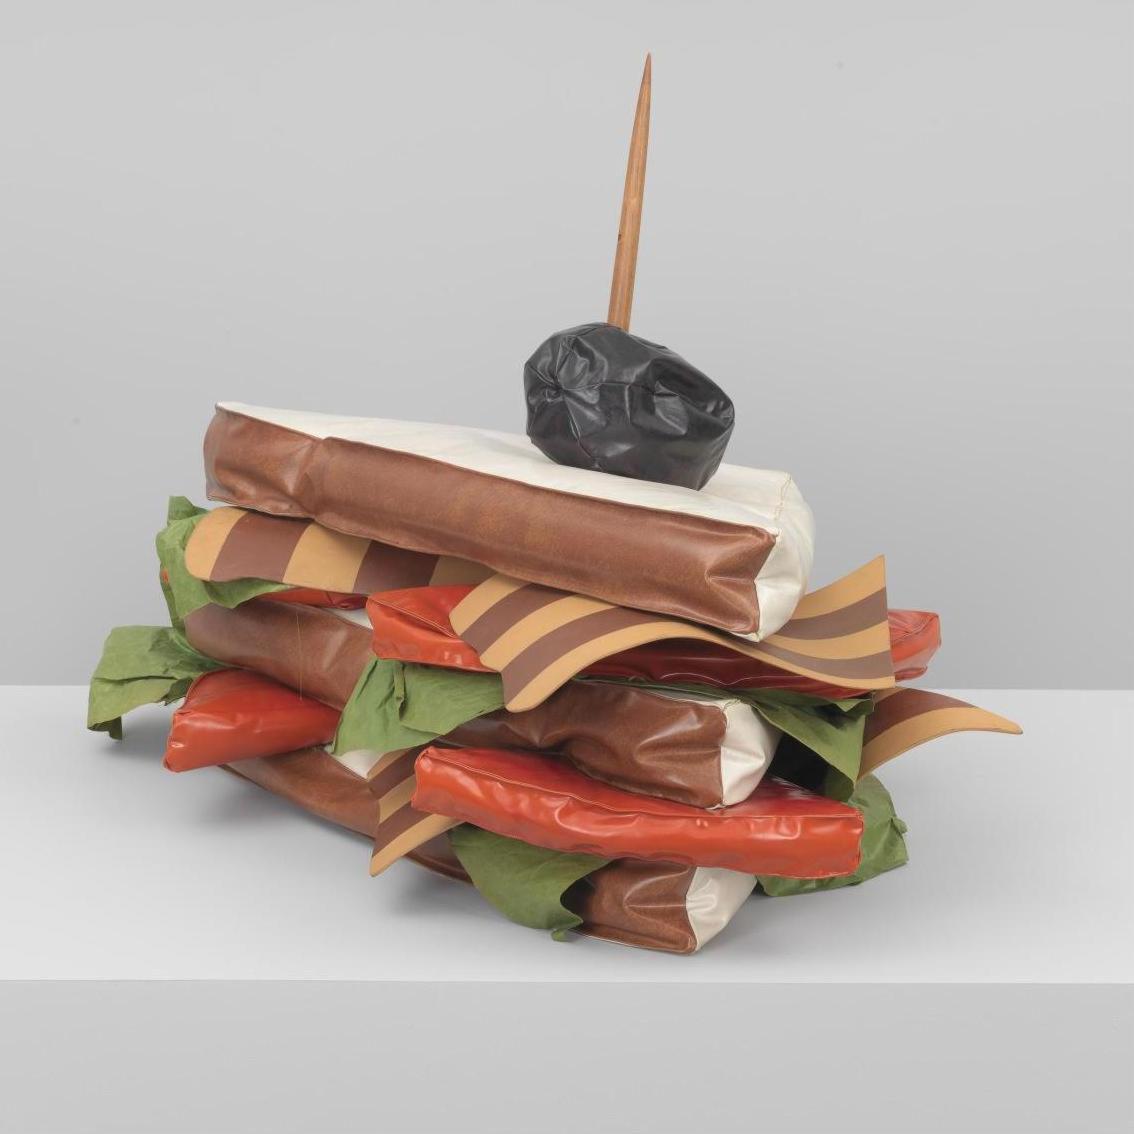 Many of us have taken this extended time at home to sharpen our cooking and baking skills. Naturally, this #ClaesOldenburg soft sculpture came to mind. The components of Giant BLT are reassembled each time the sculpture is installed, adding an element of flexibility to the work.